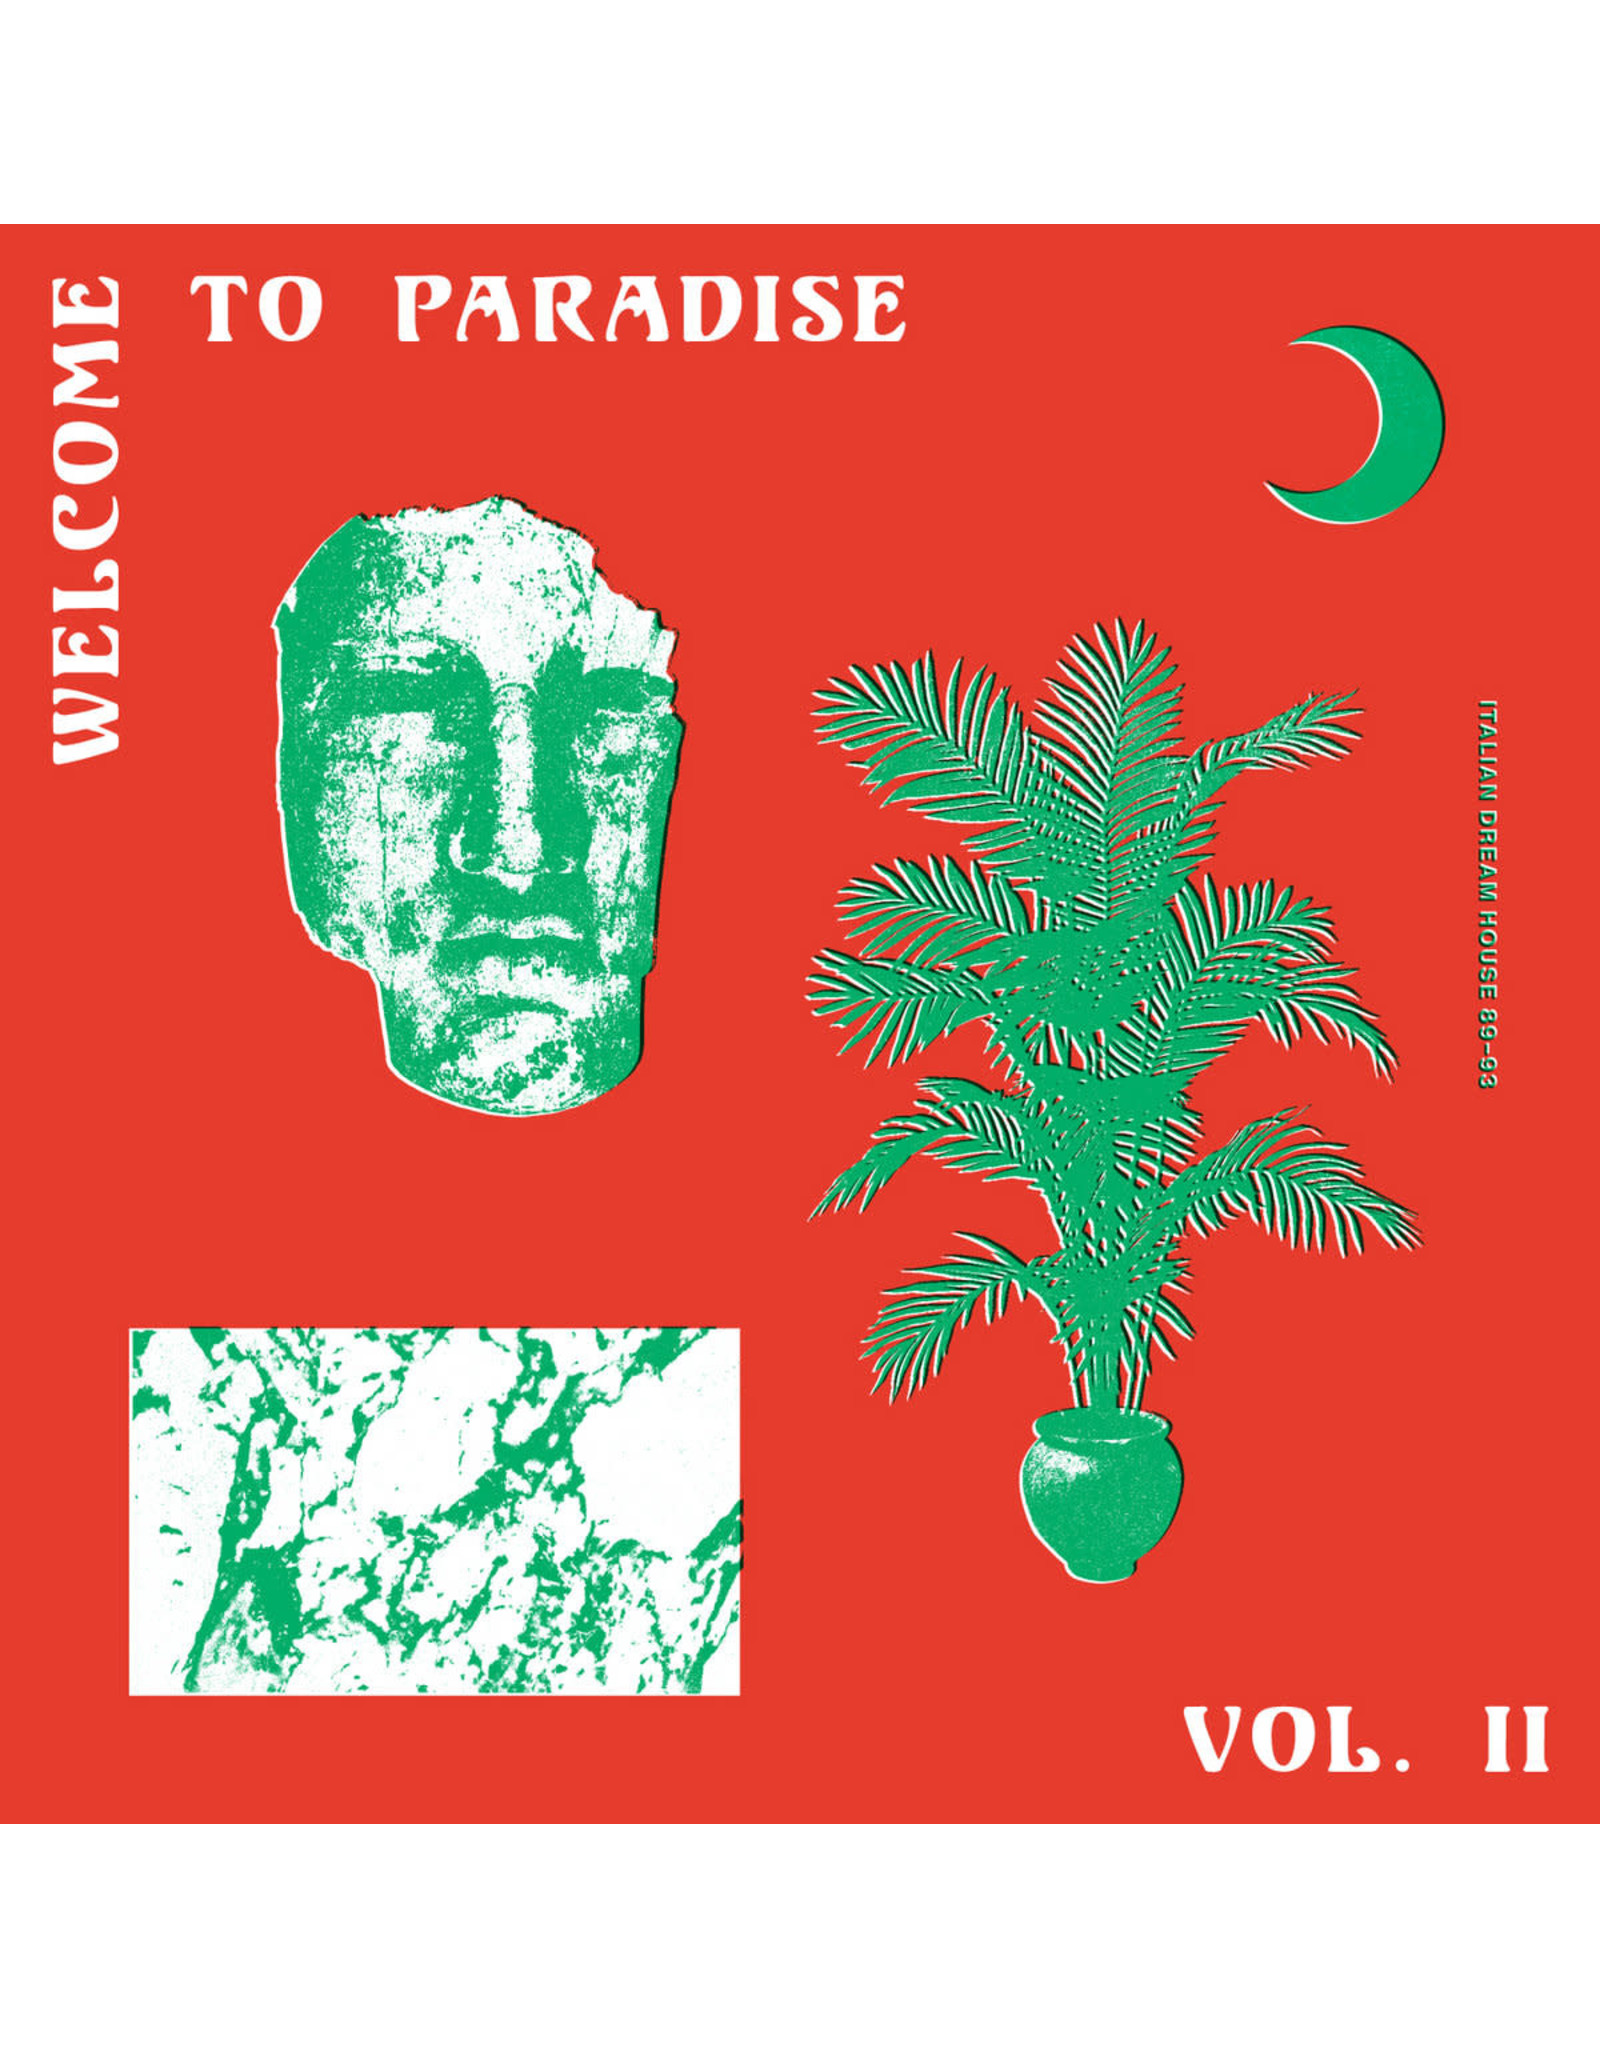 Safe Trip Various: Welcome to Paradise (Italian Dream House 89-93) Vol. 2 LP